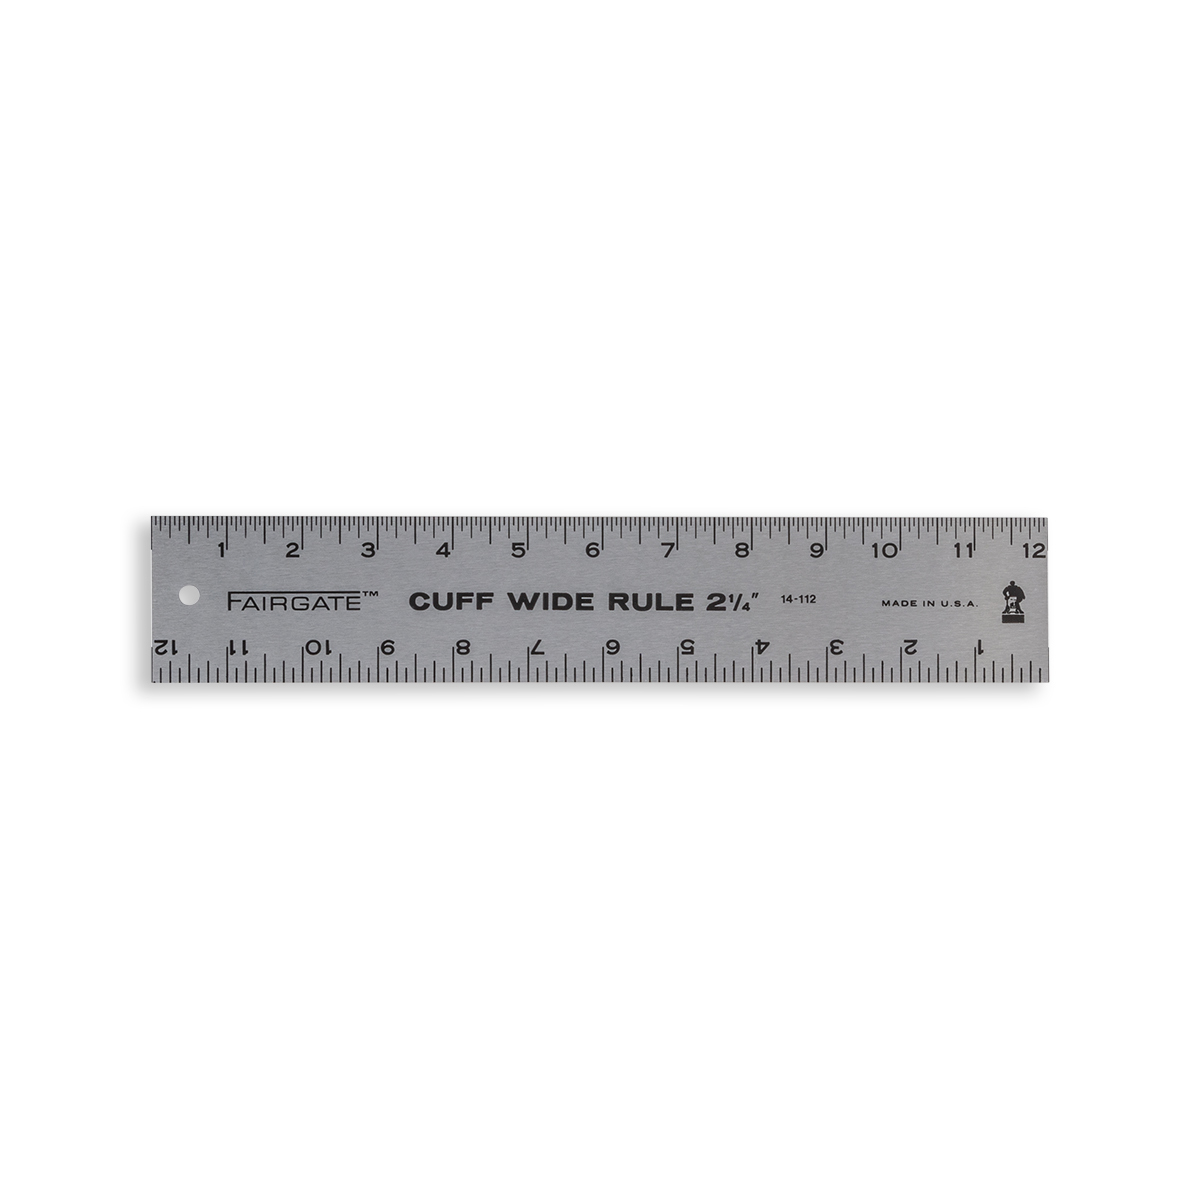 L-Square Metal Tailor Ruler For Sewing - Cleaner's Supply